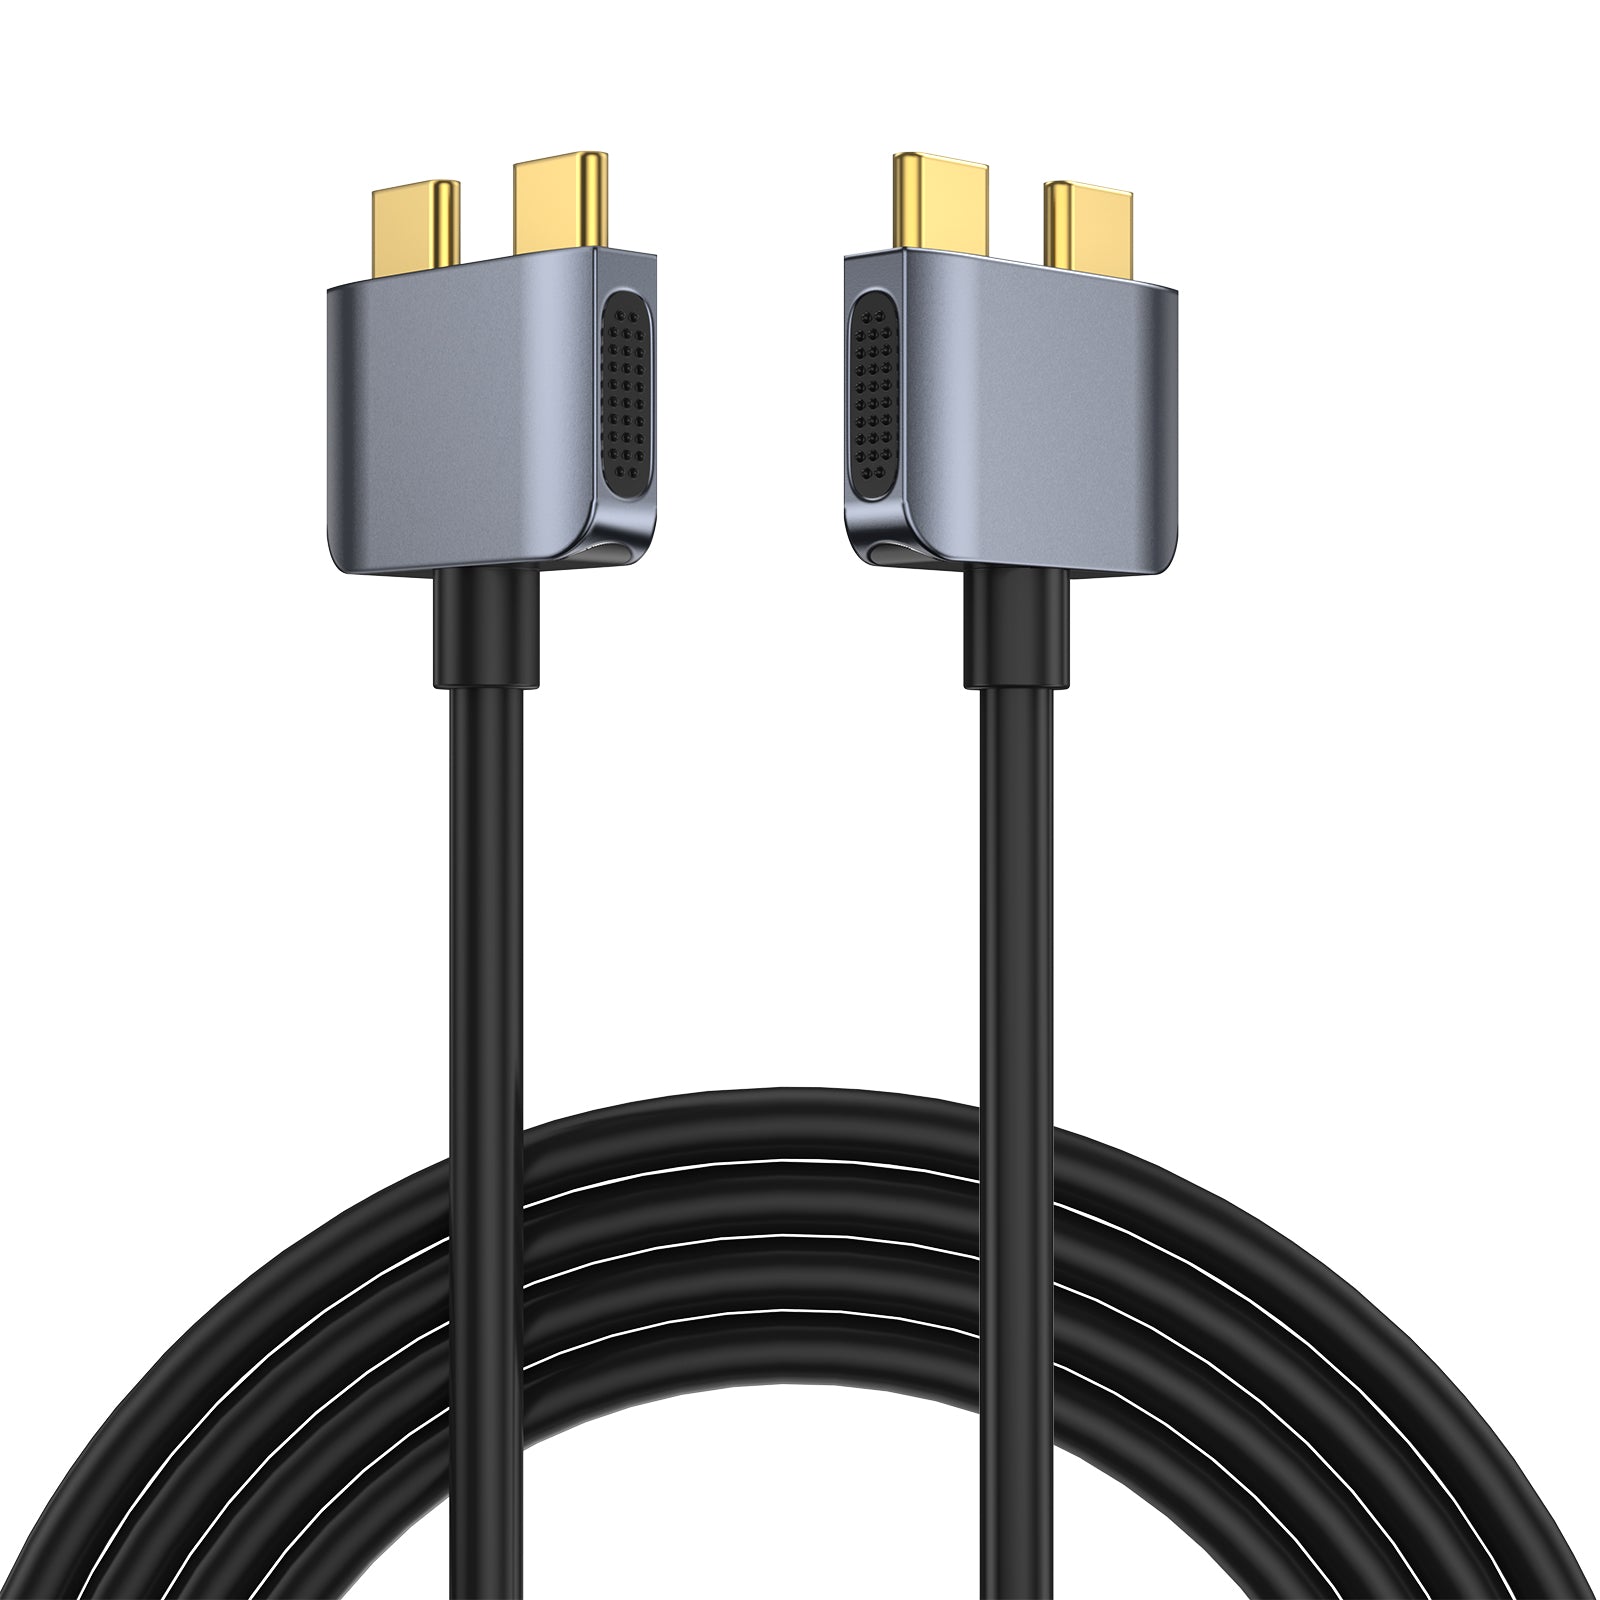 Dual USB-C Cables Only Work with TobenONE Products